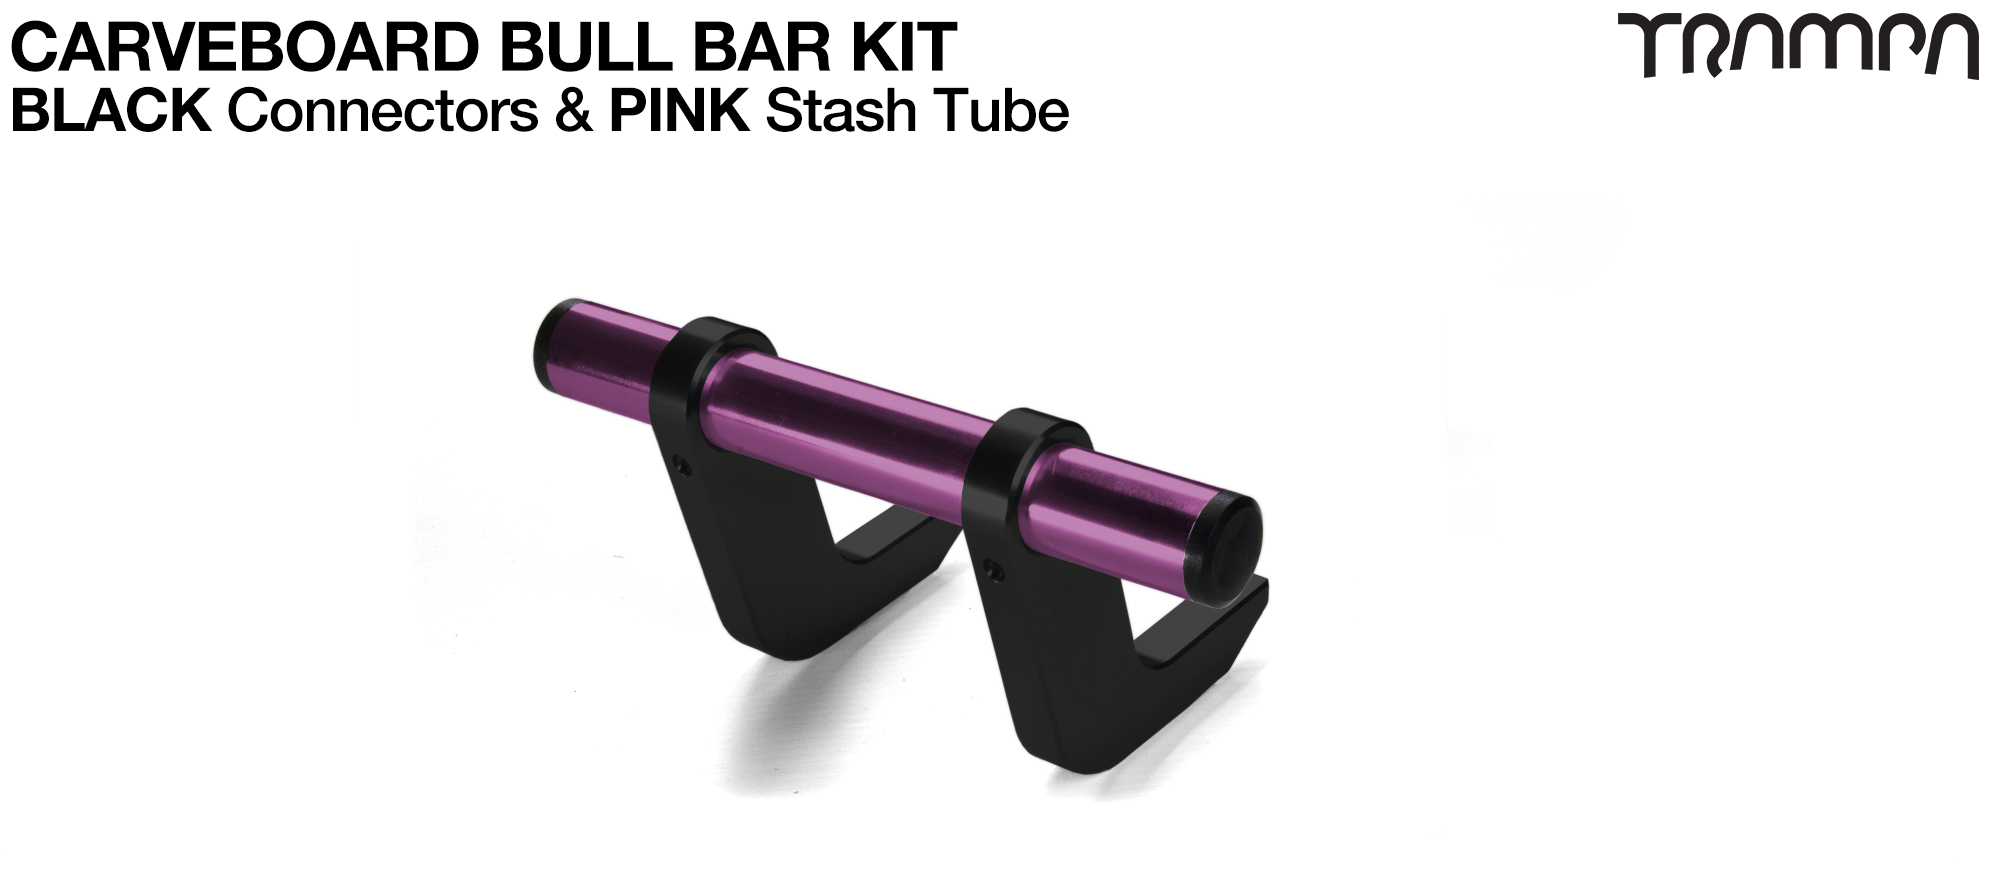 BLACK Uprights  &PINK Crossbar BULL BARS for CARVE BOARDS using T6 Heat Treated CNC'd AluminIum Clamps, Hollow Aluminium Stash Tubes with Rubber end bungs 